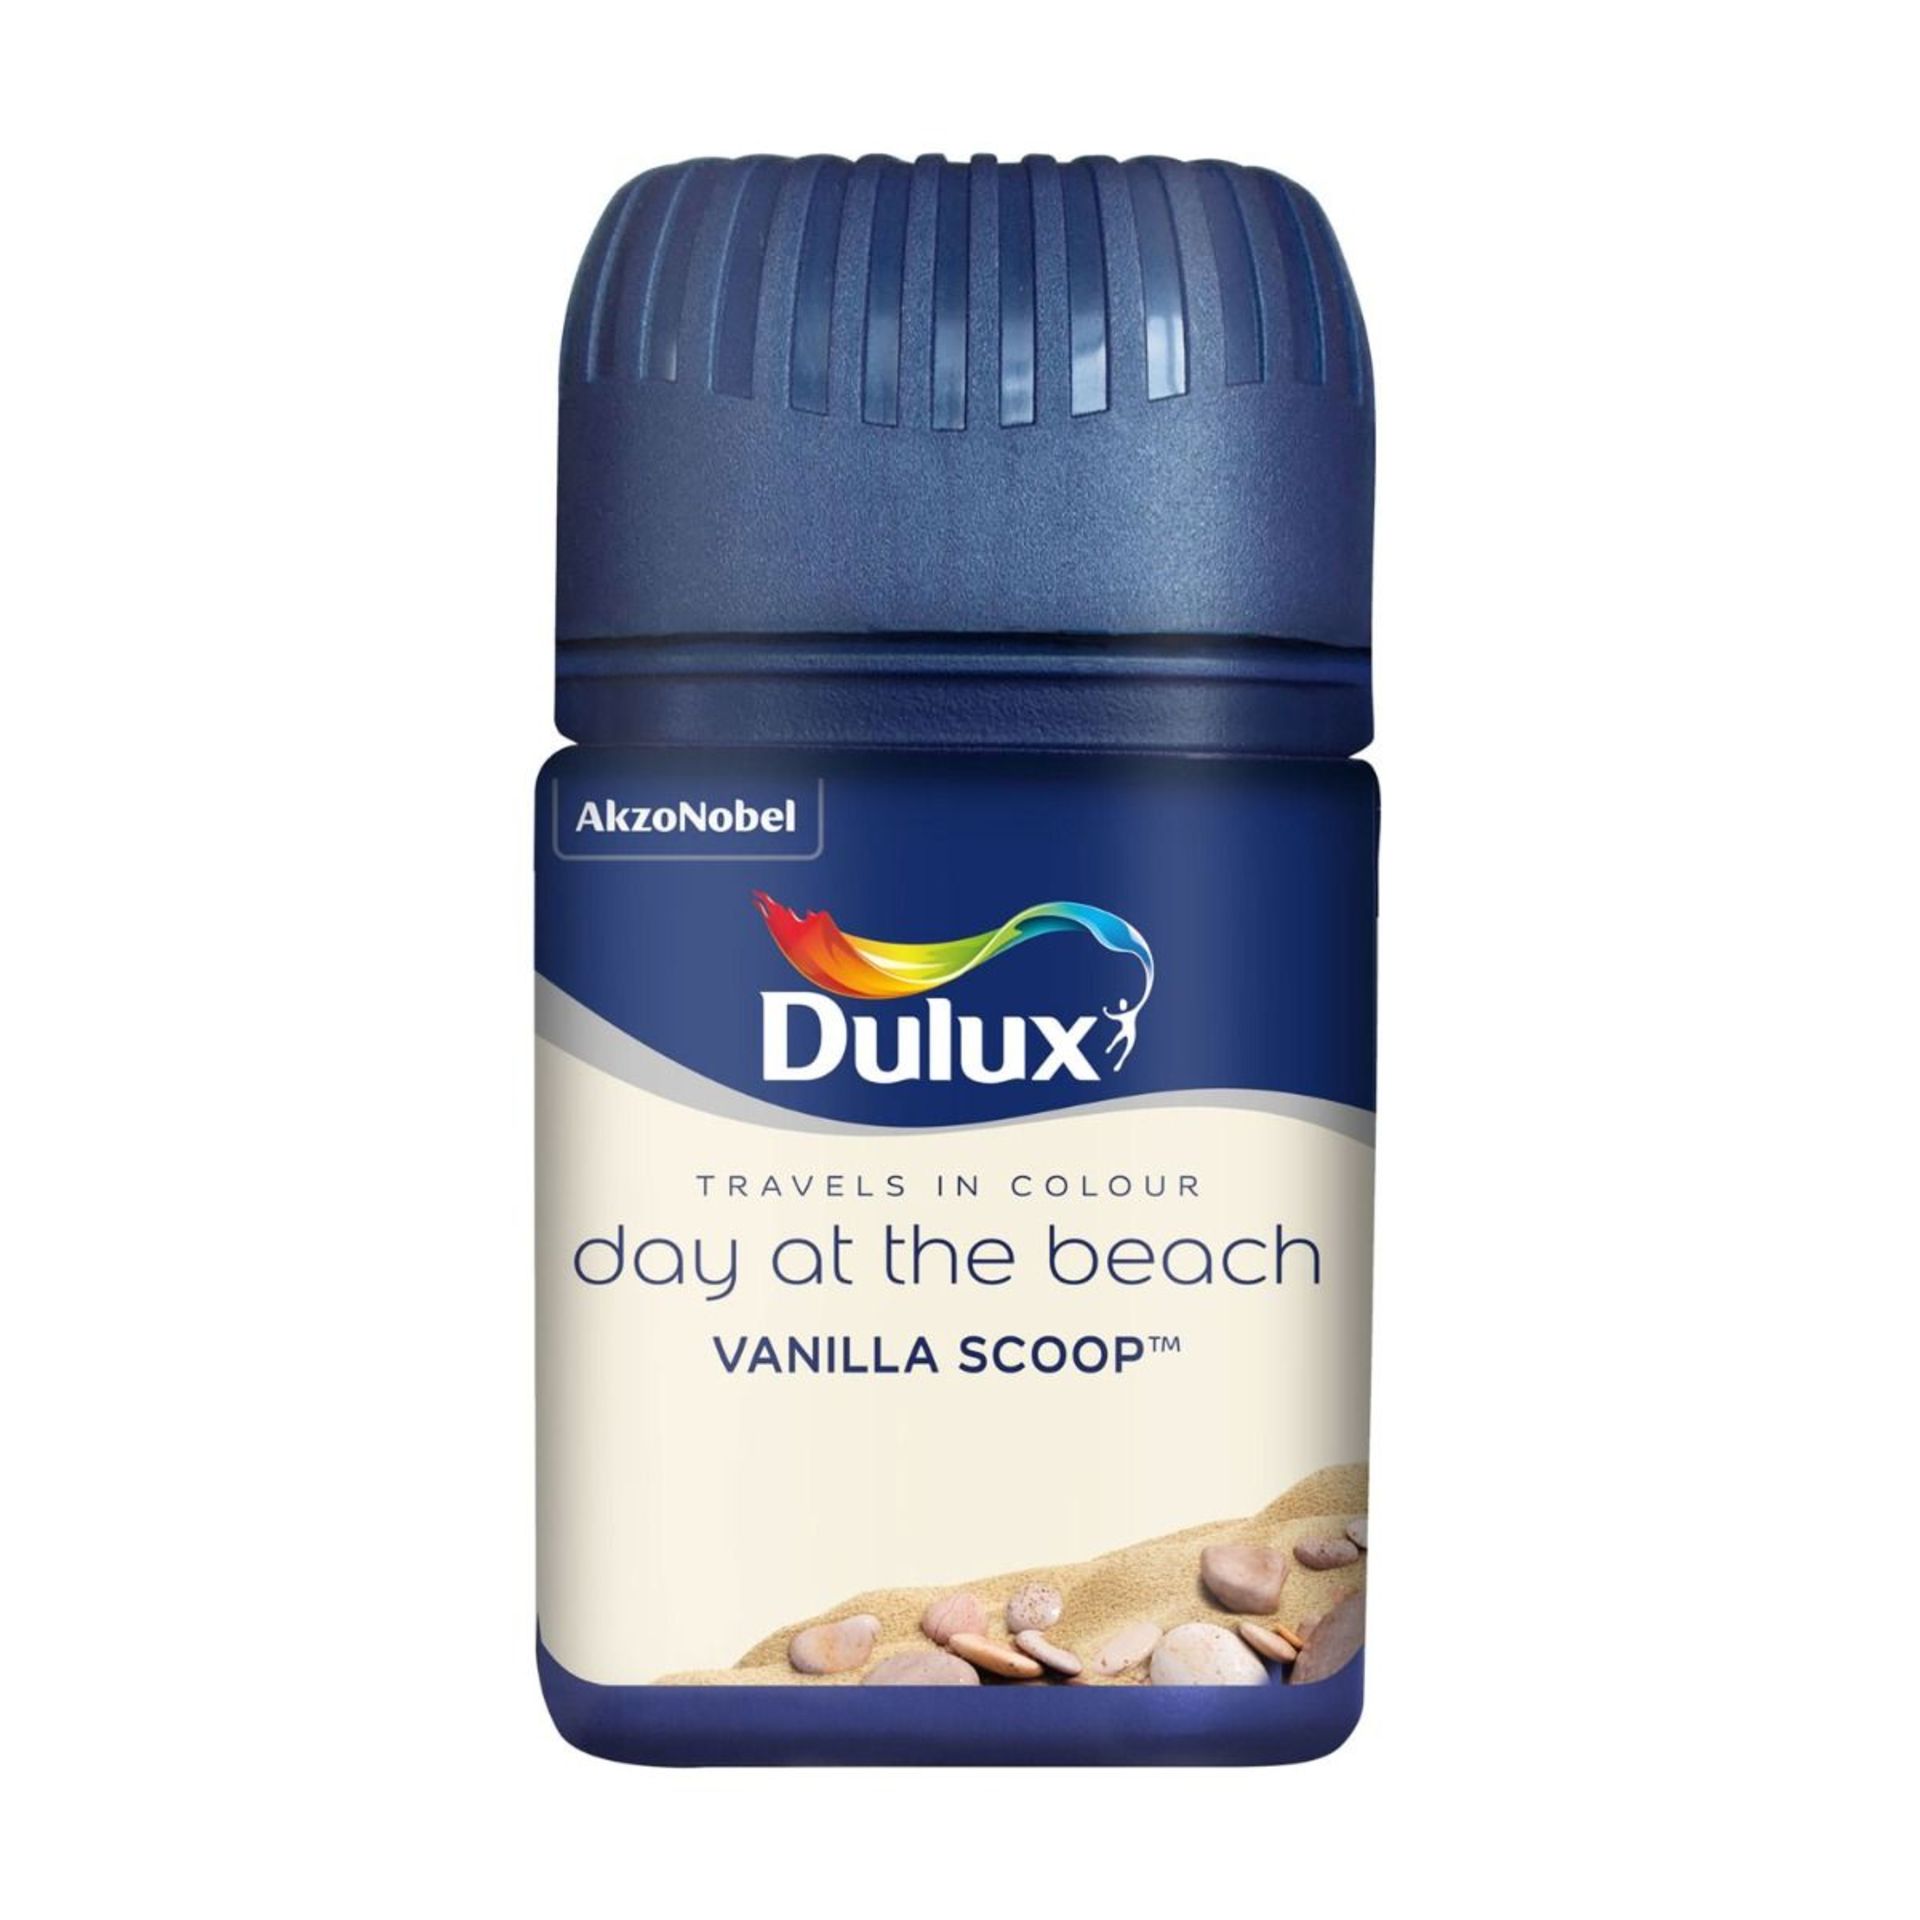 Approximately 7500 Dulux Wall & Ceiling Paint Testers | 50ml Units - Image 2 of 4